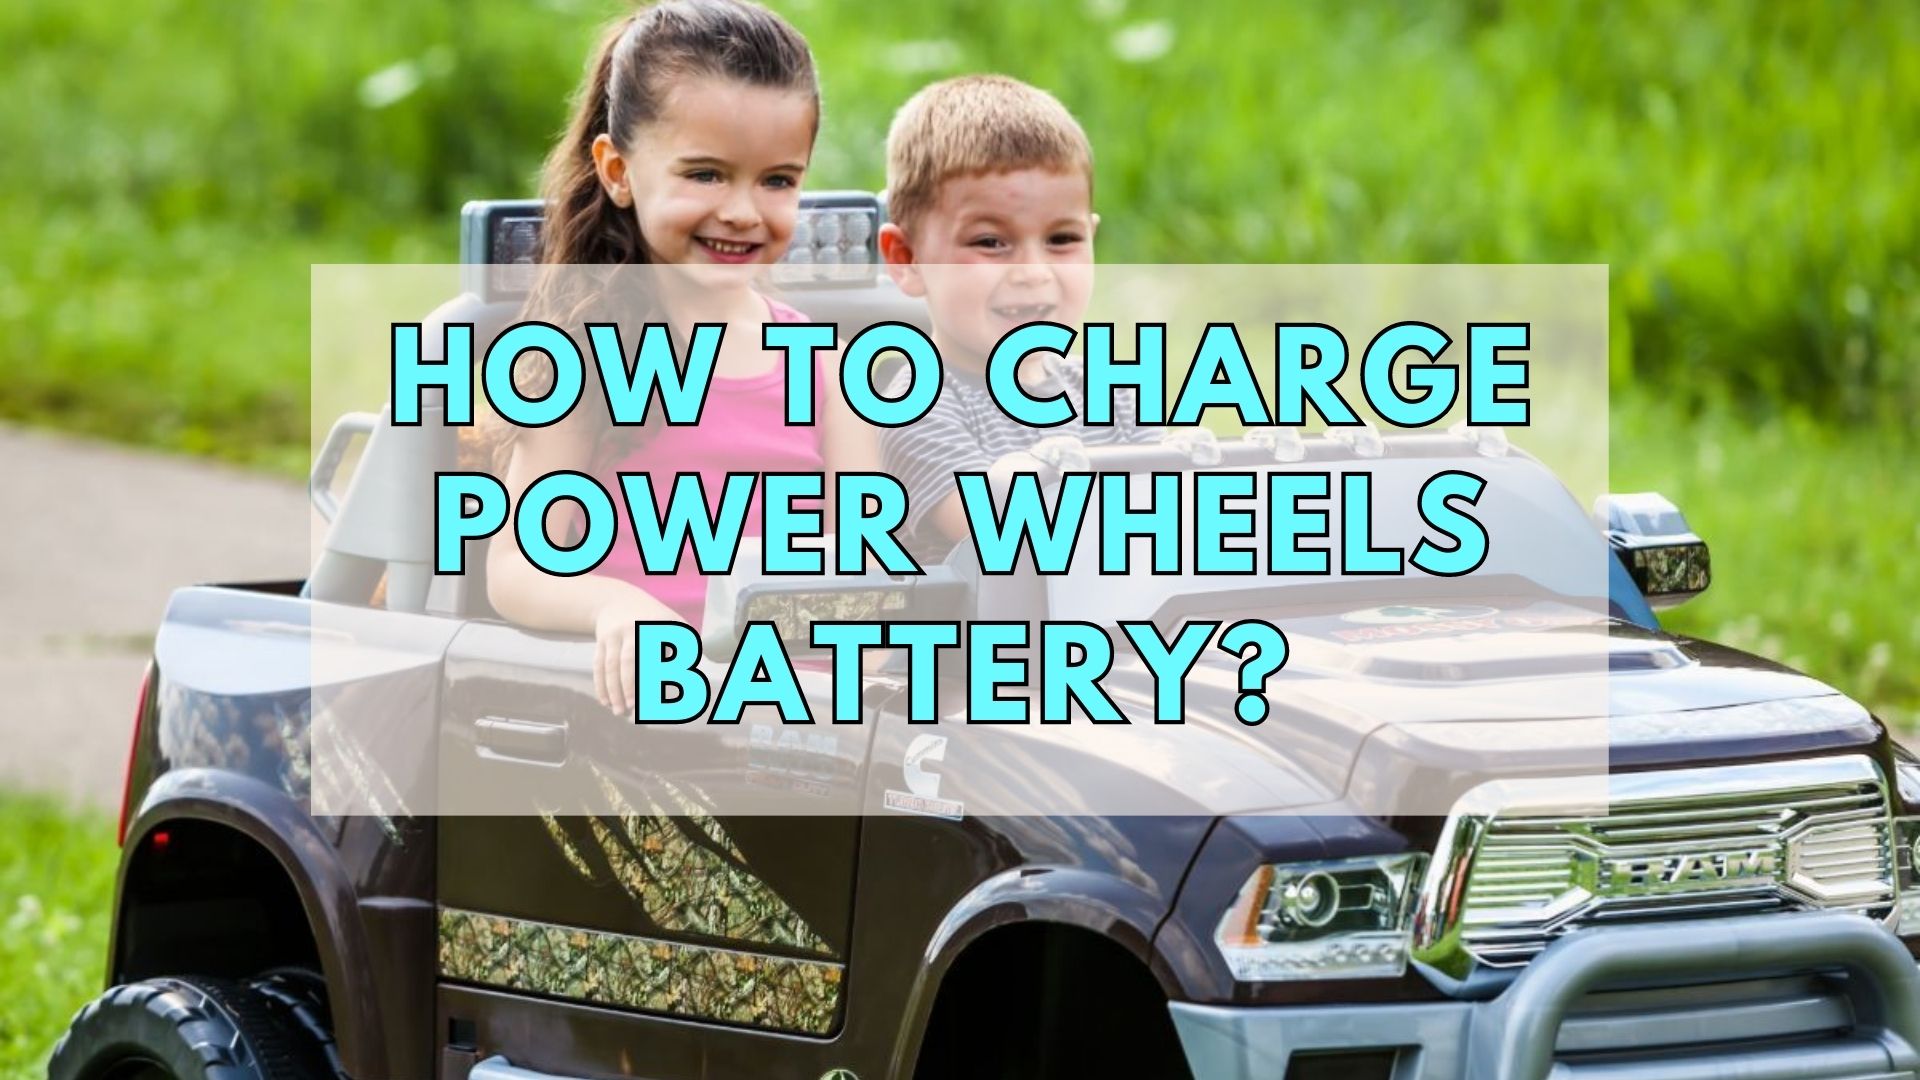 How To Charge Power Wheels Battery